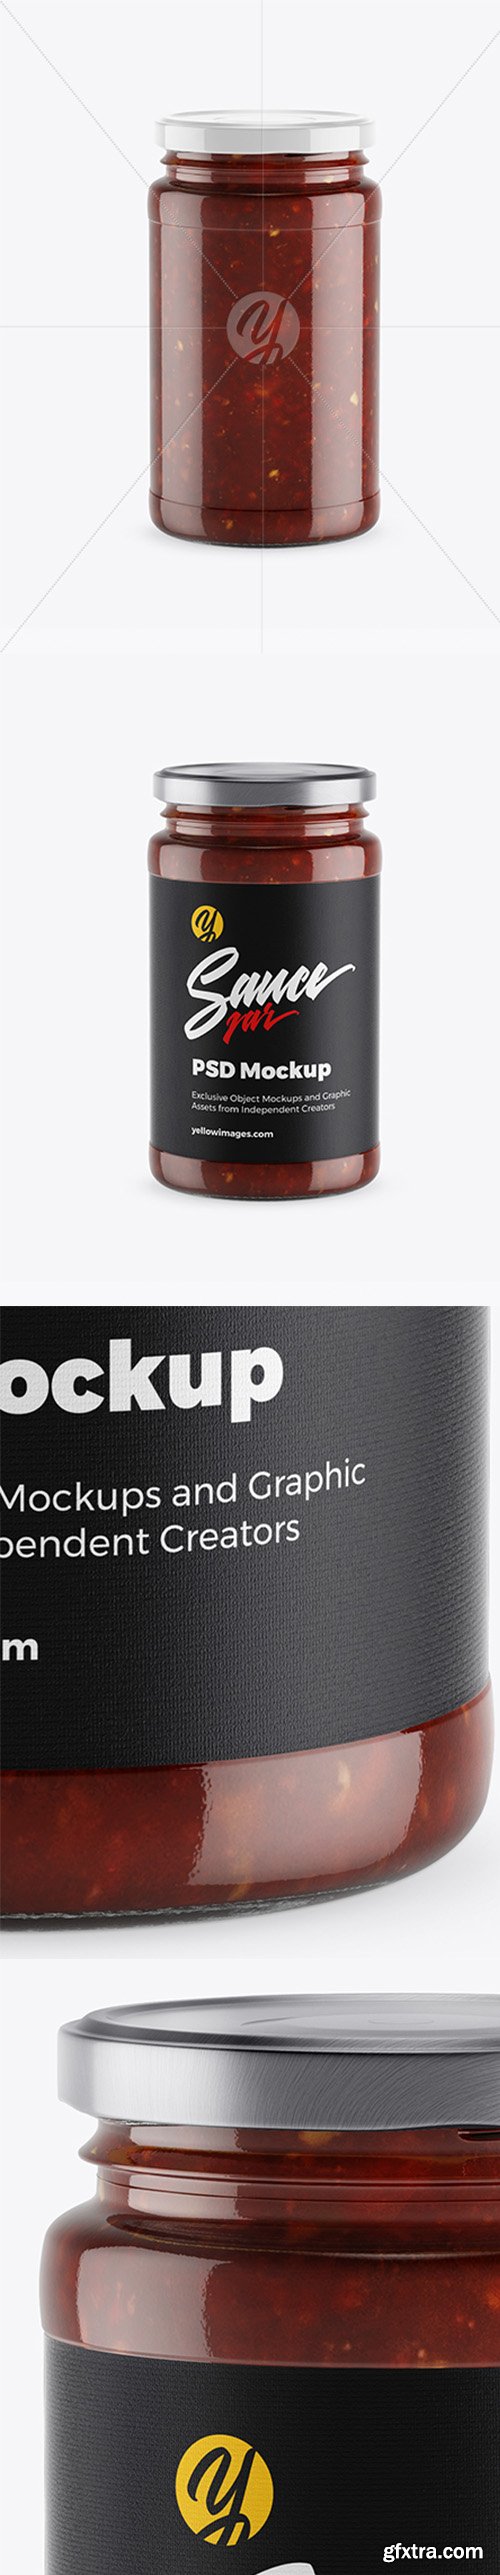 Download Gfxtra Page 27223 Yellowimages Mockups